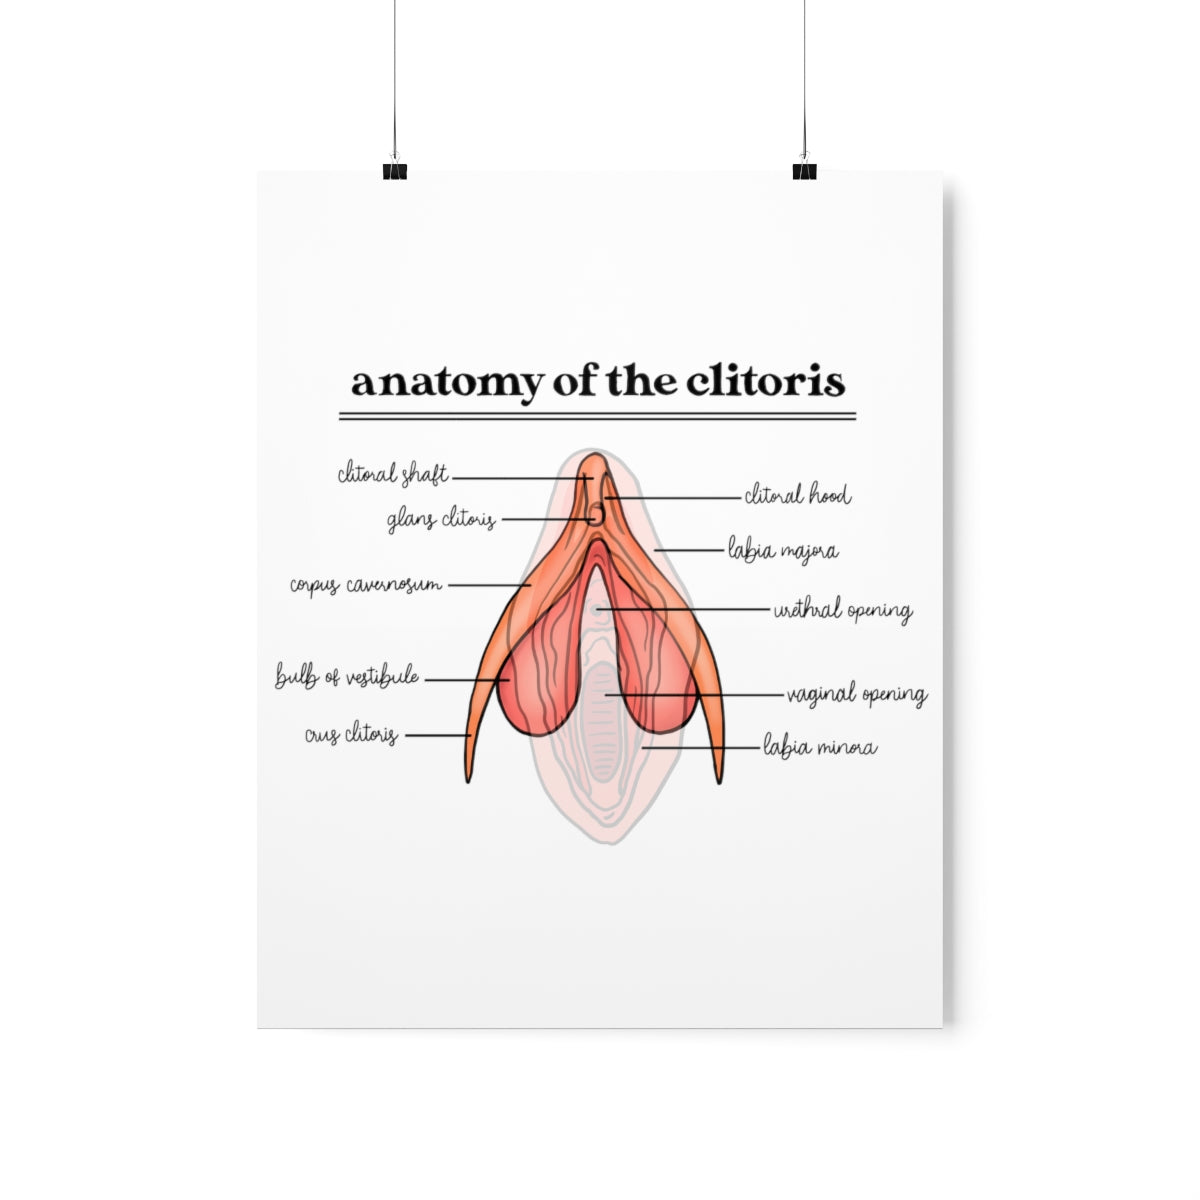 Anatomy of the Clitoris Poster